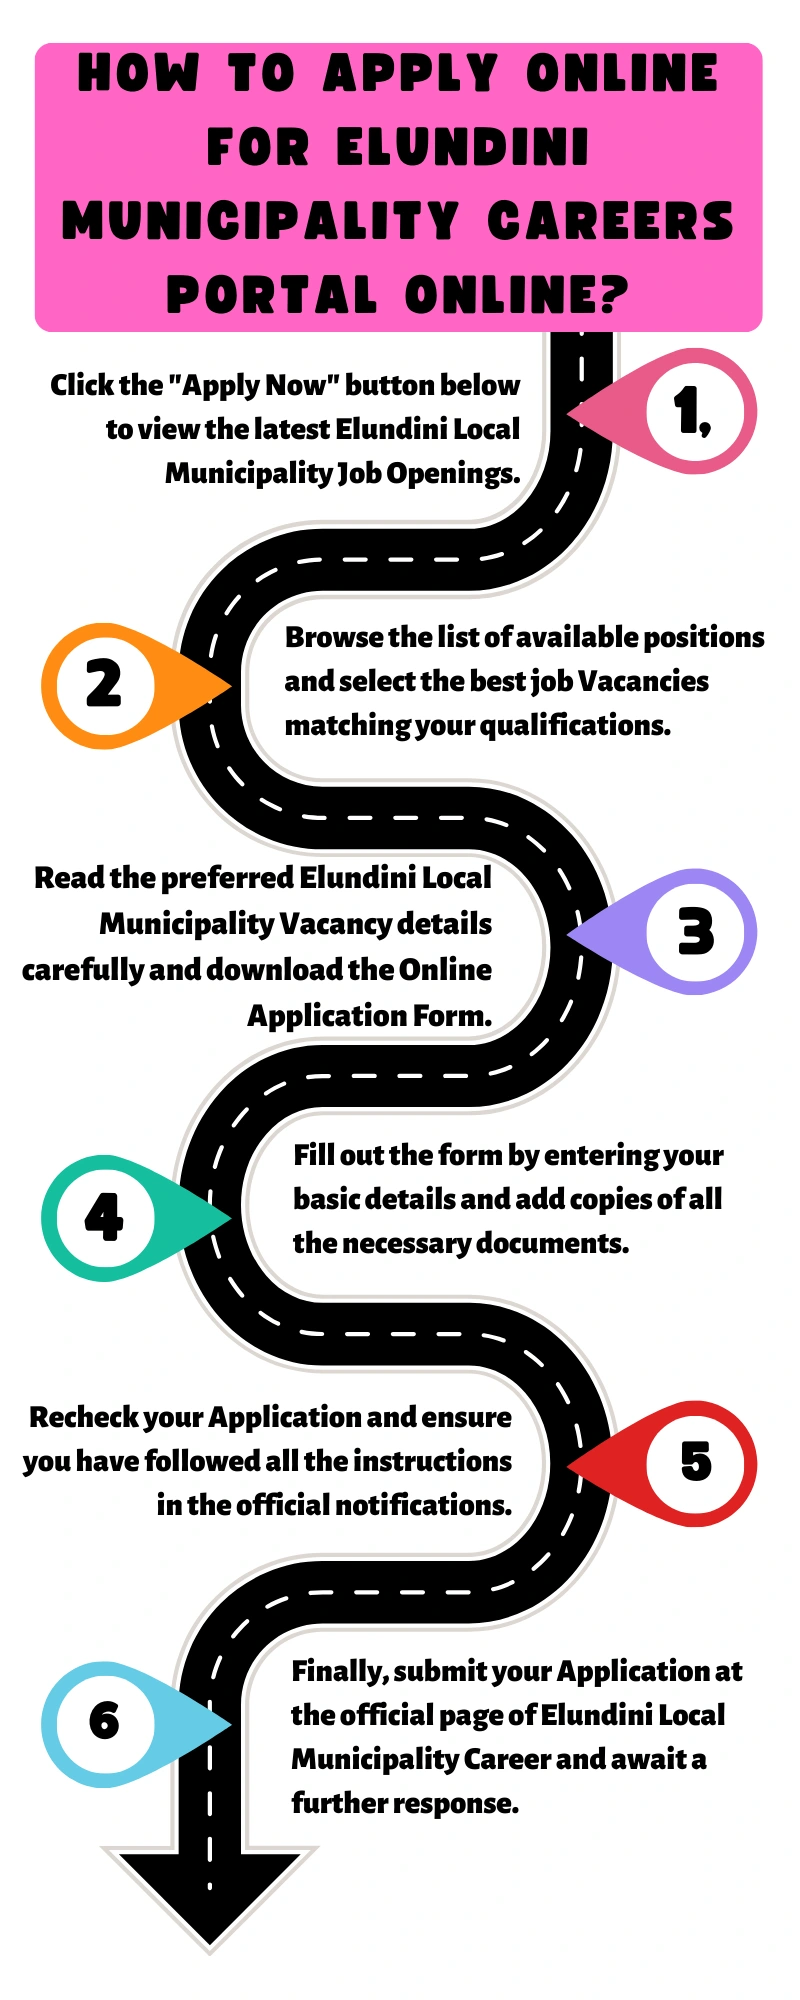 How to Apply online for Elundini Municipality Careers Portal Online?